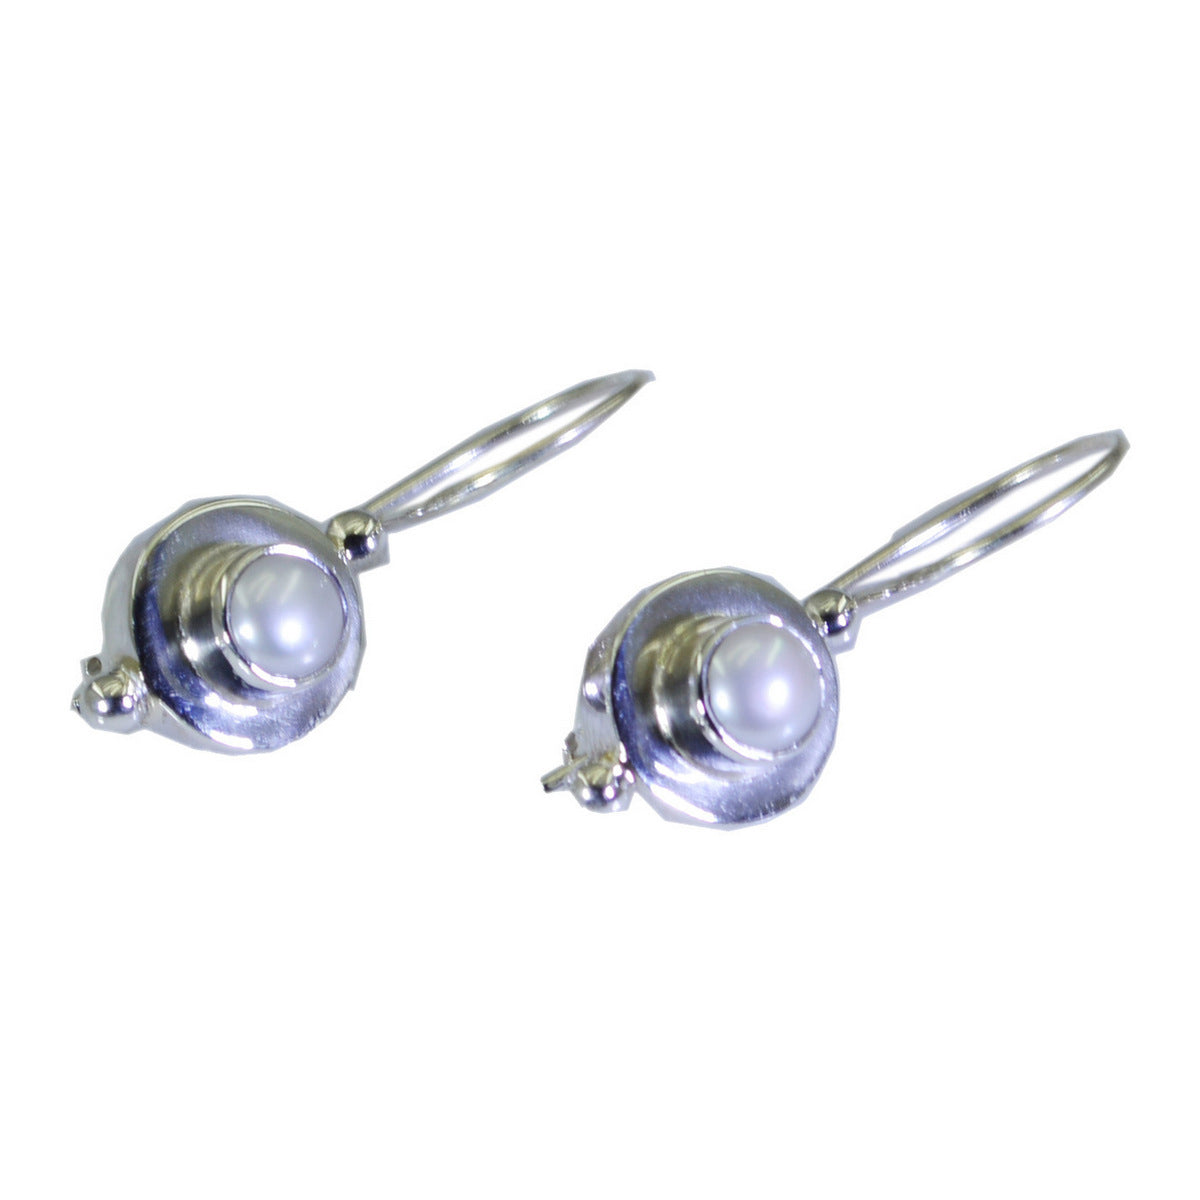 Riyo Good Gemstones round Cabochon White Peral Silver Earring gift for valentine's day